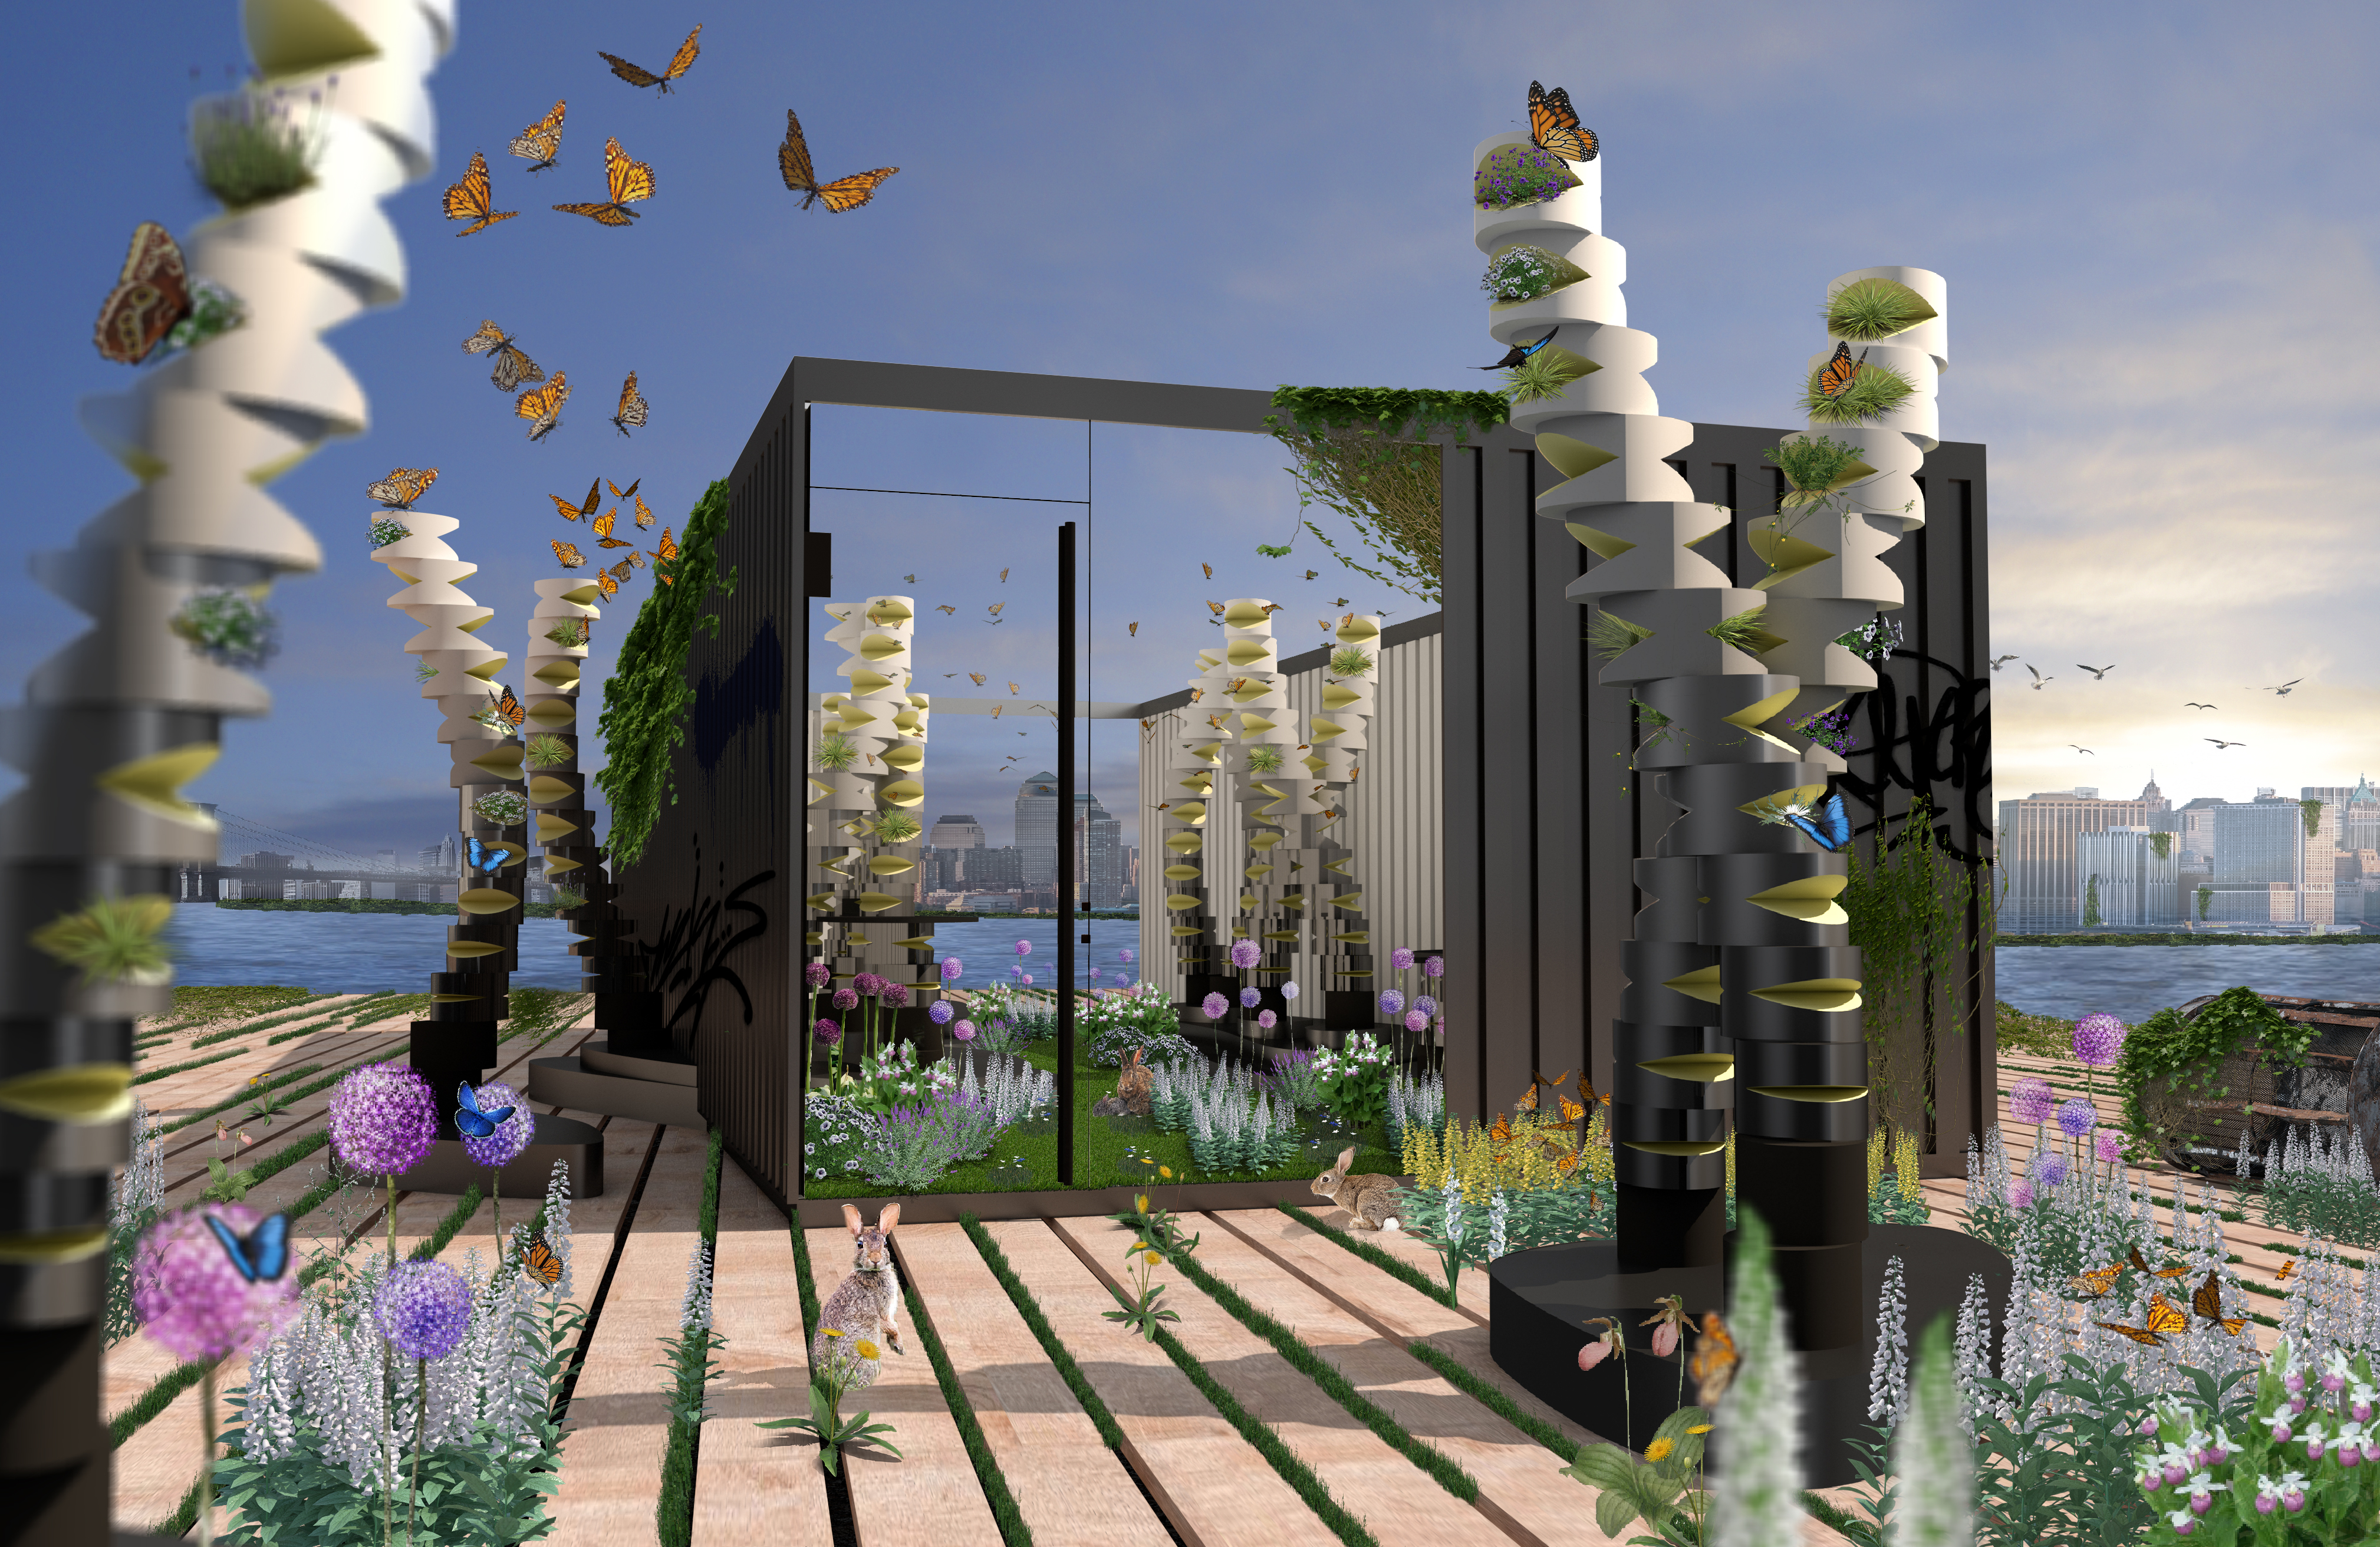 An rendering of an architectural popup on a pier near the river populated by wildlife.